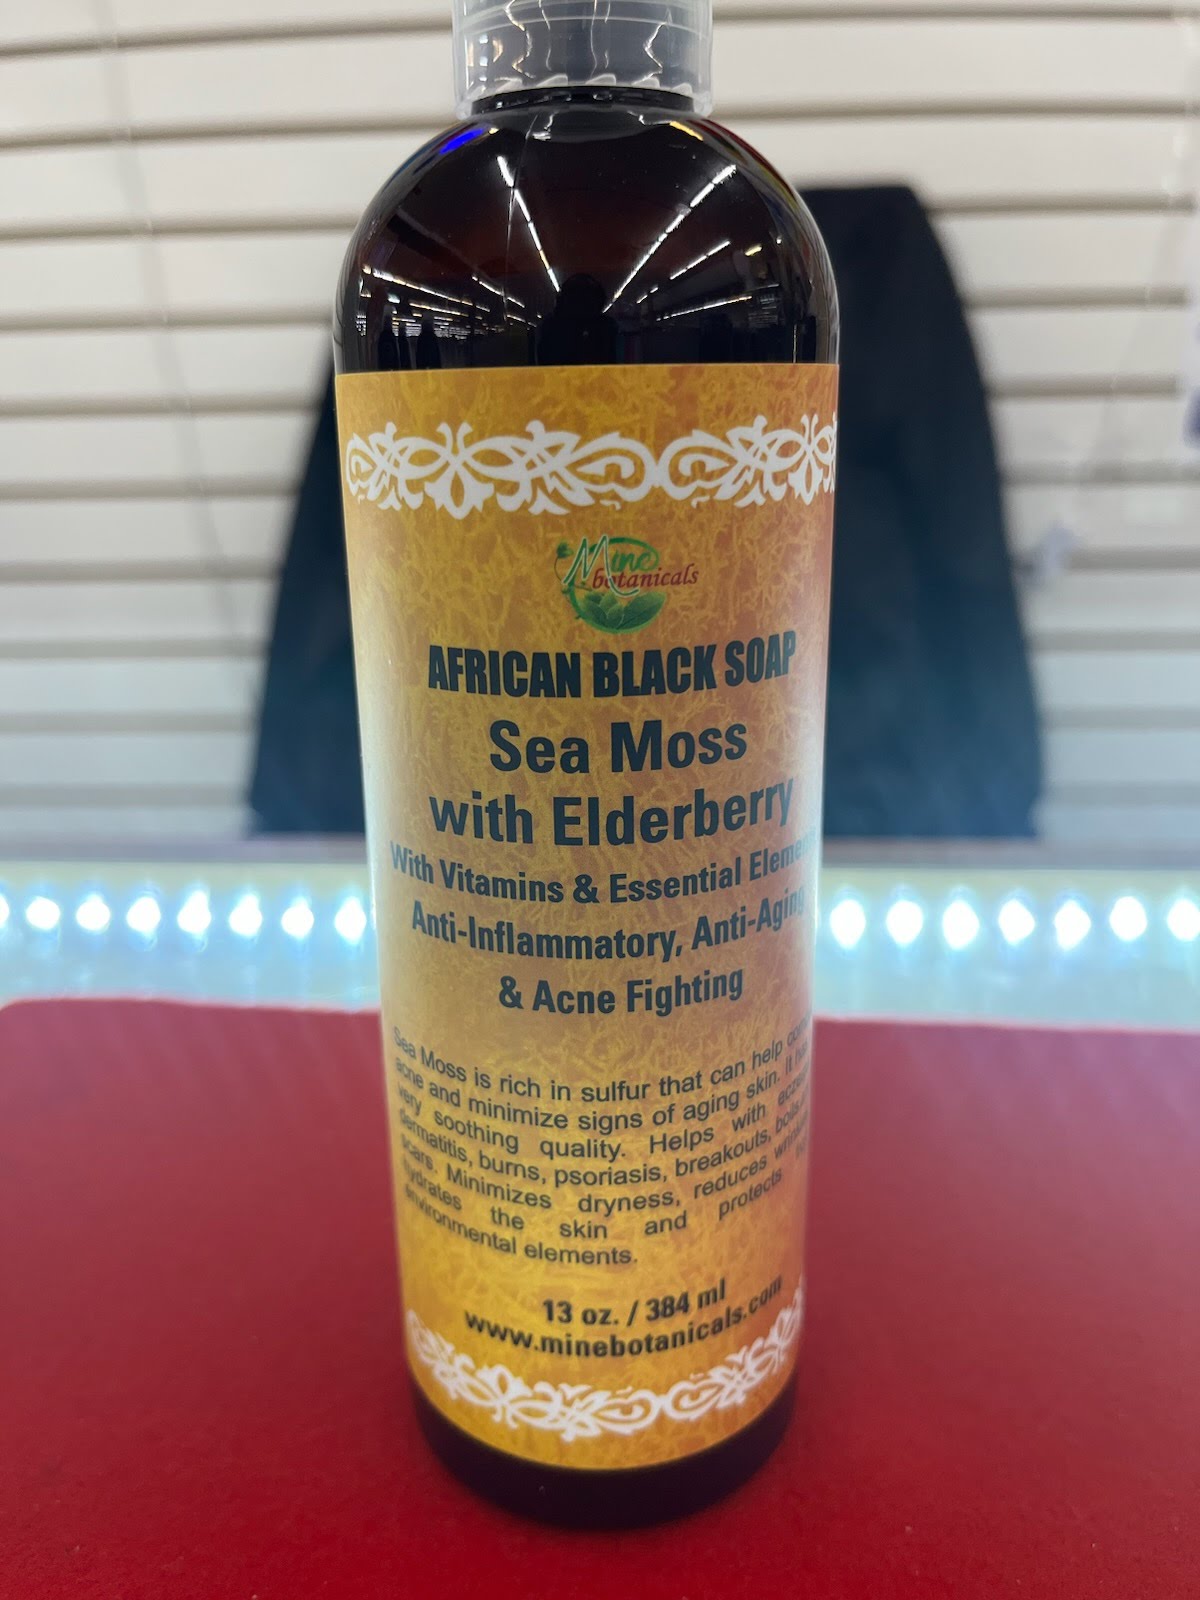 A bottle of african black soap with elderberry.